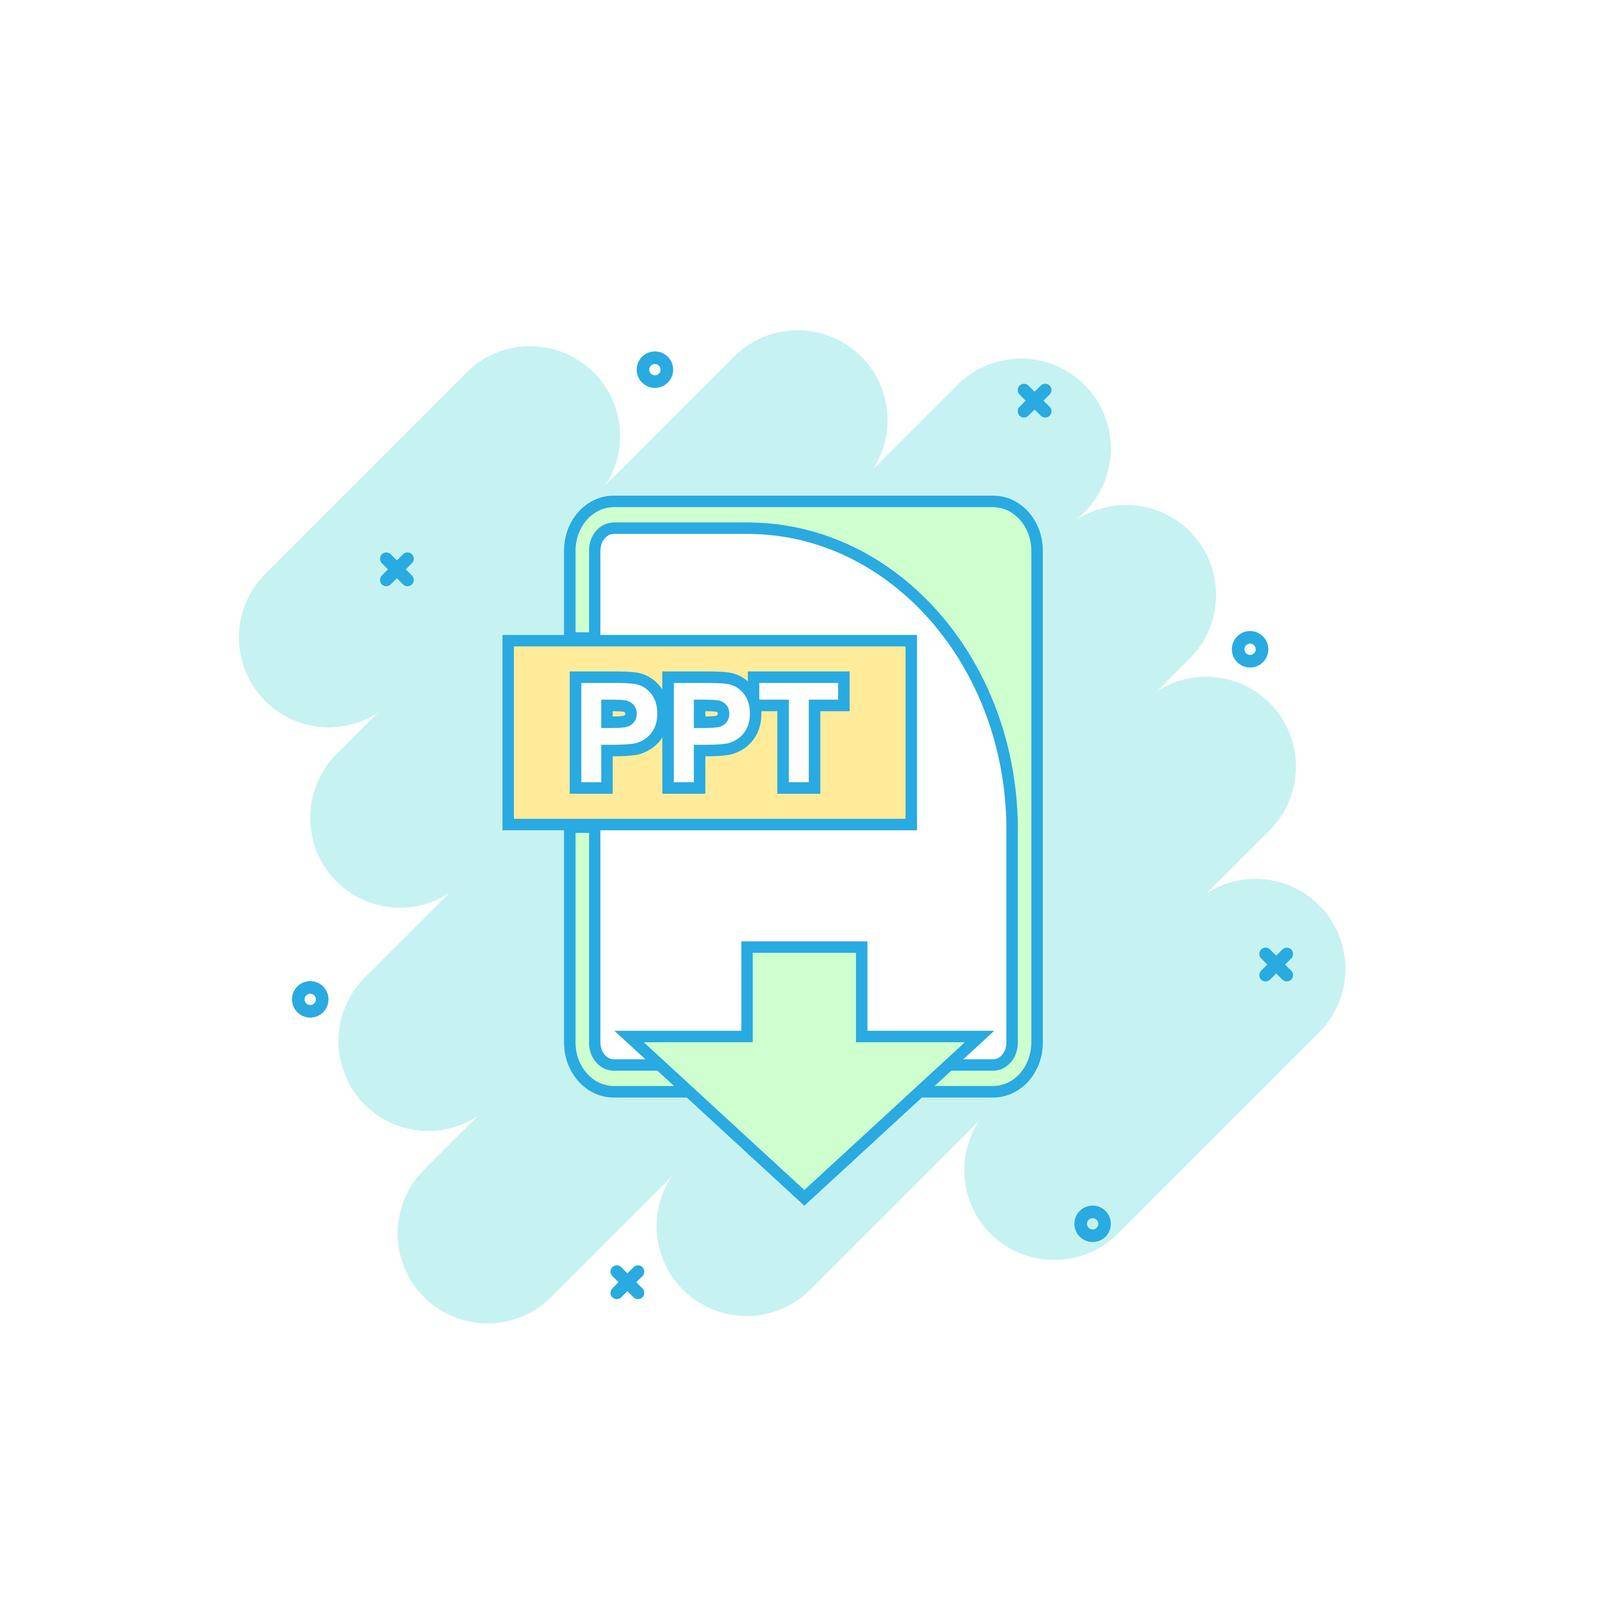 Cartoon colored PPT file icon in comic style. Ppt download illustration pictogram. Document splash business concept.